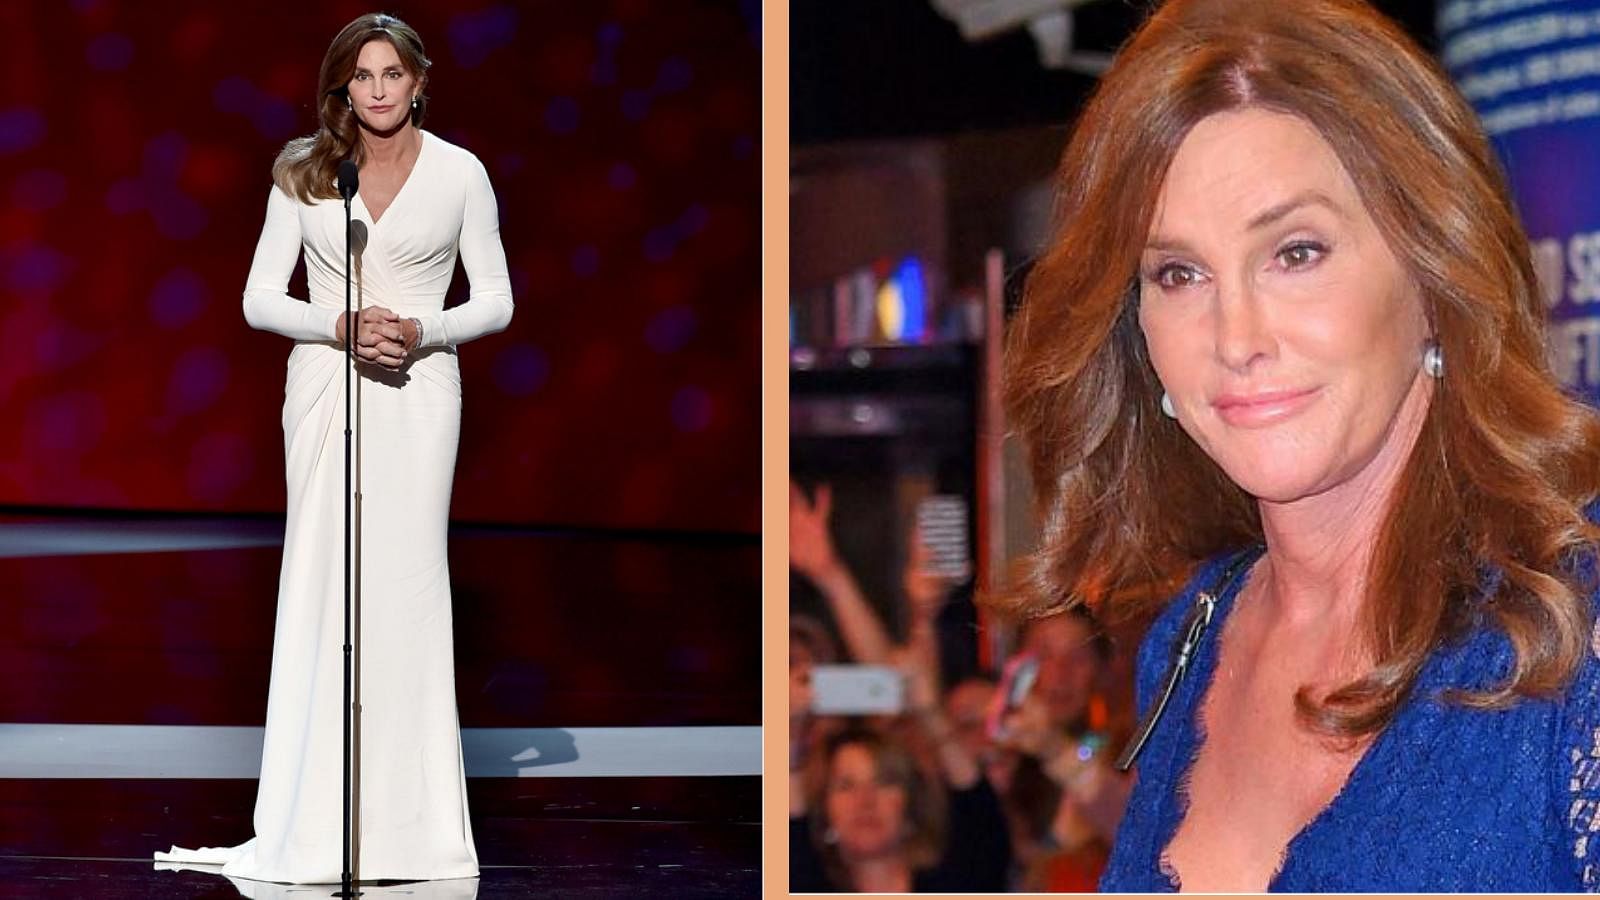 Left: Caitlyn Jenner in a white Atelier Versace to receive the Arthur Ashe Courage Award 2015. The transgender has not got the penis removal plastic surgery yet, insisting genital surgery isn’t her top priority right now (Photo: Twitter/<a href="https://twitter.com/espn">@<b>espn</b></a>)